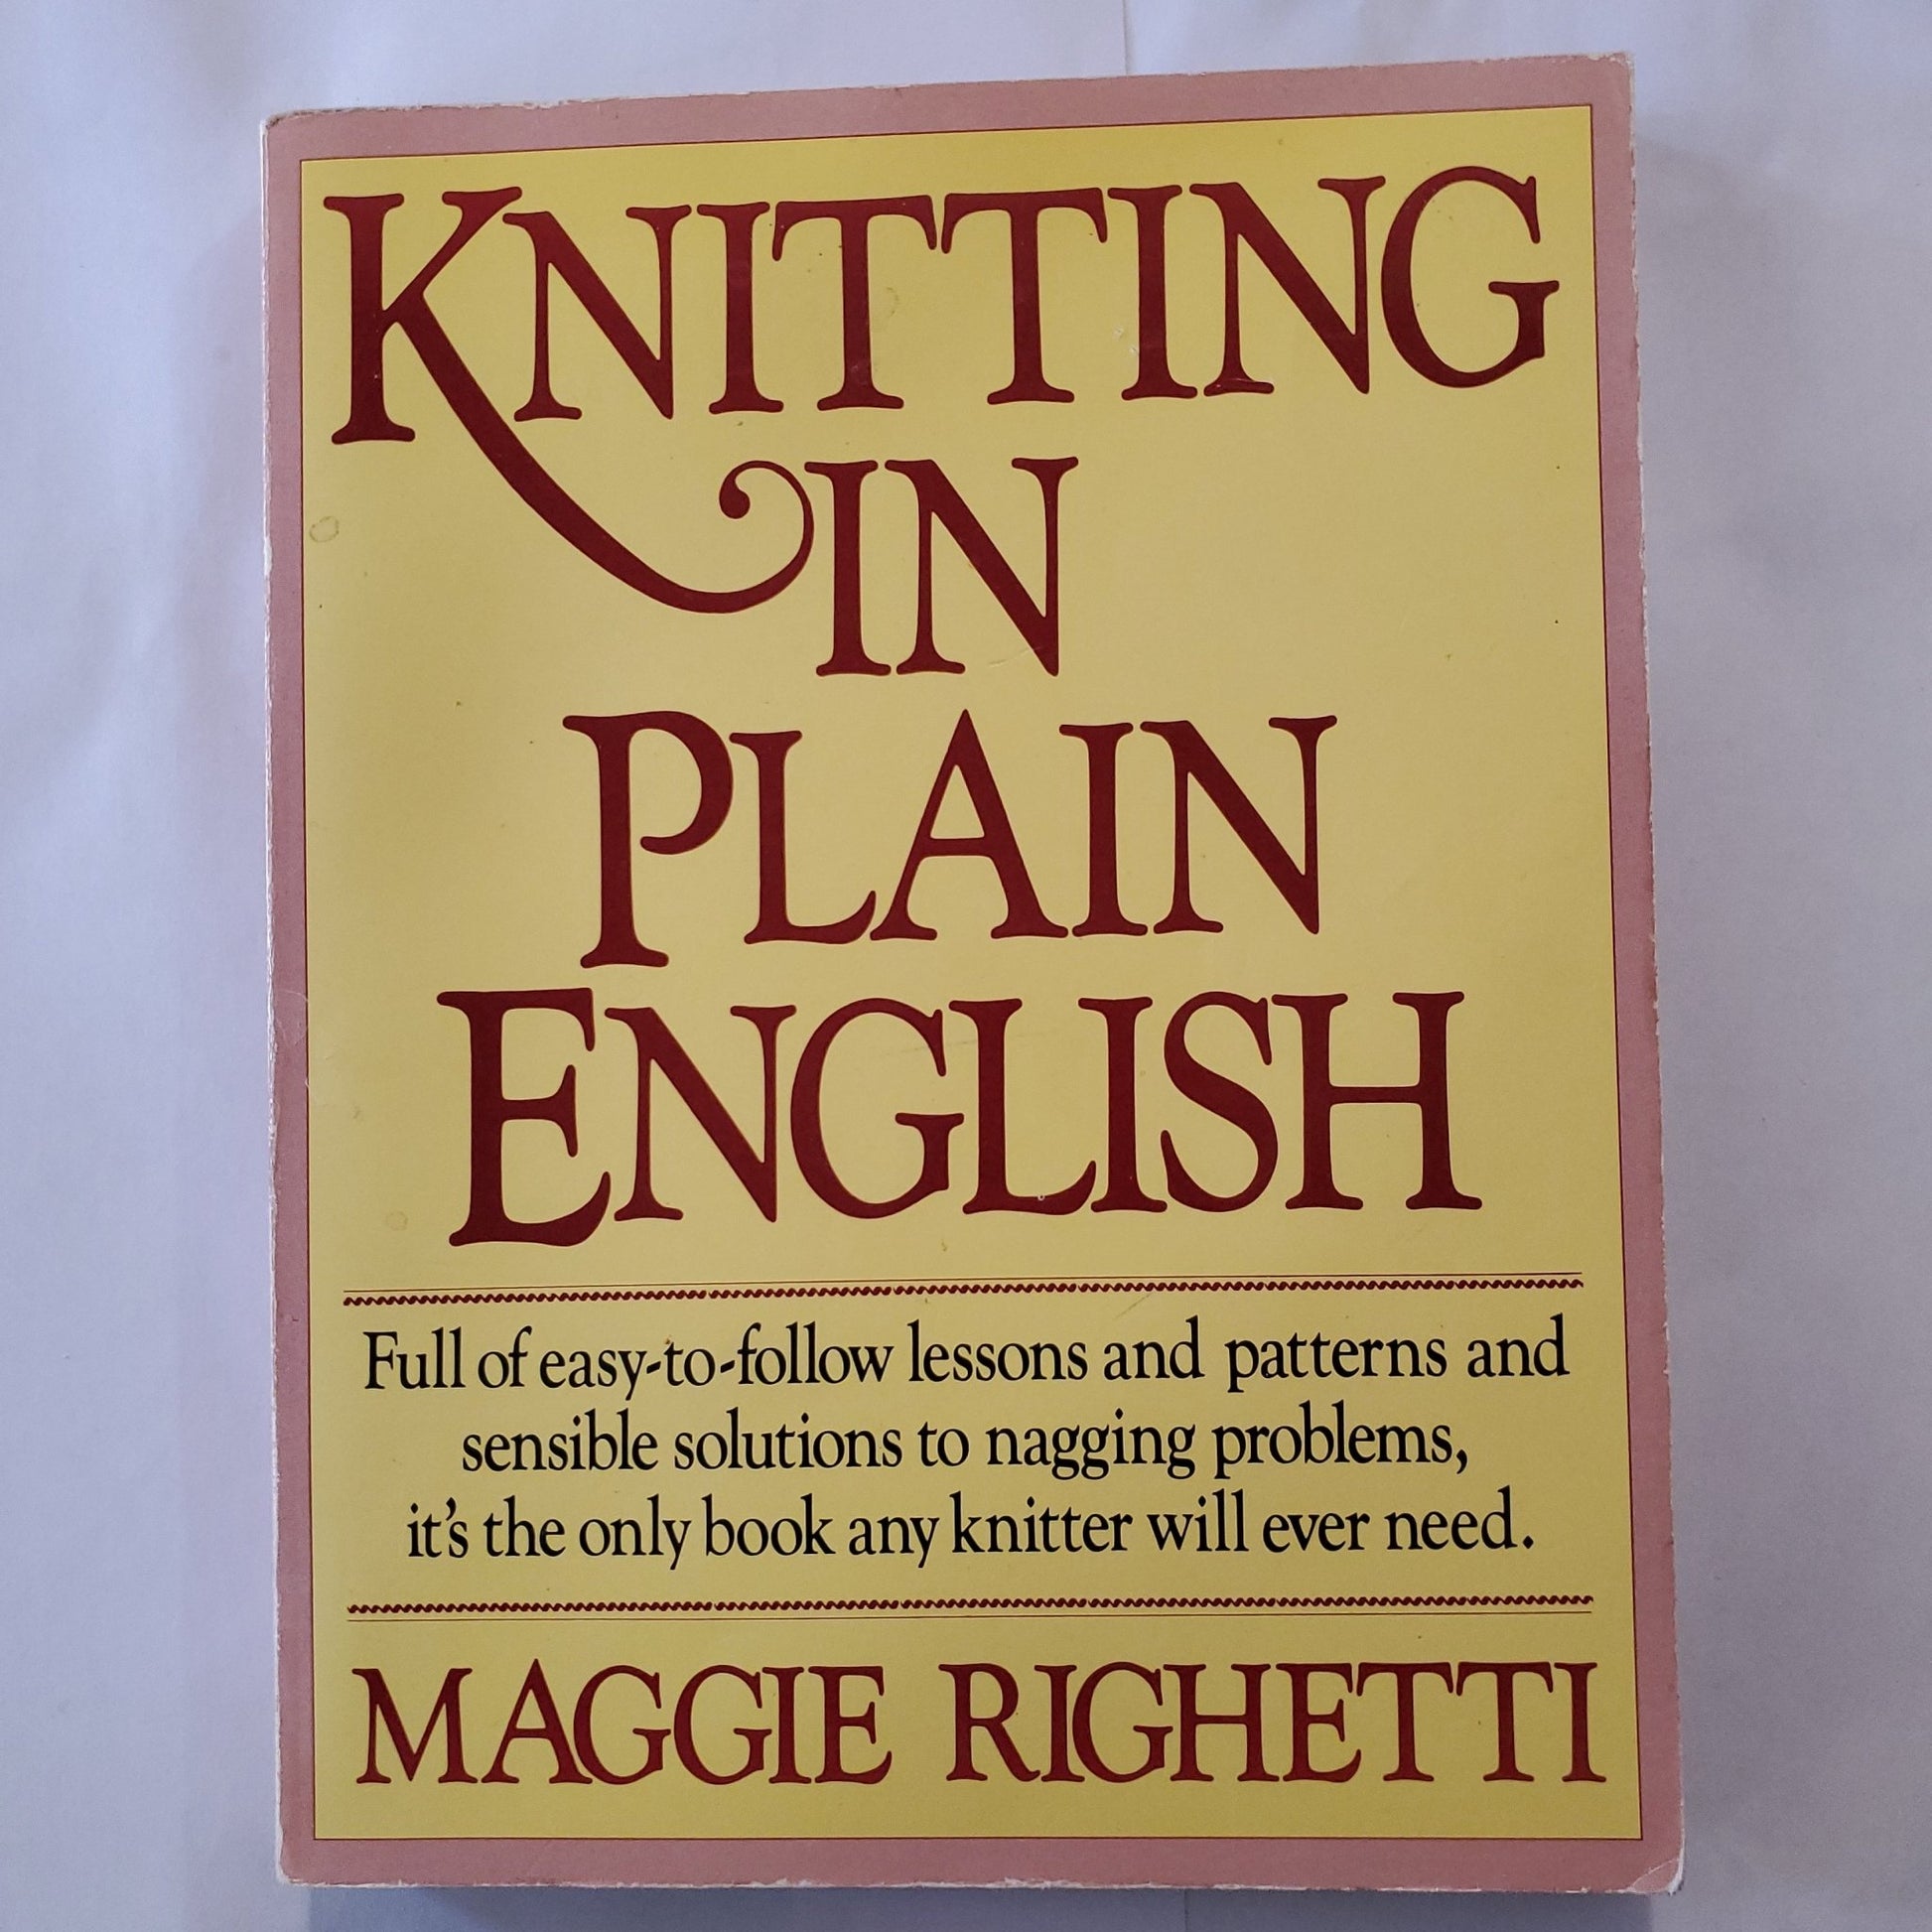 Knitting in Plain English - [ash-ling] Booksellers